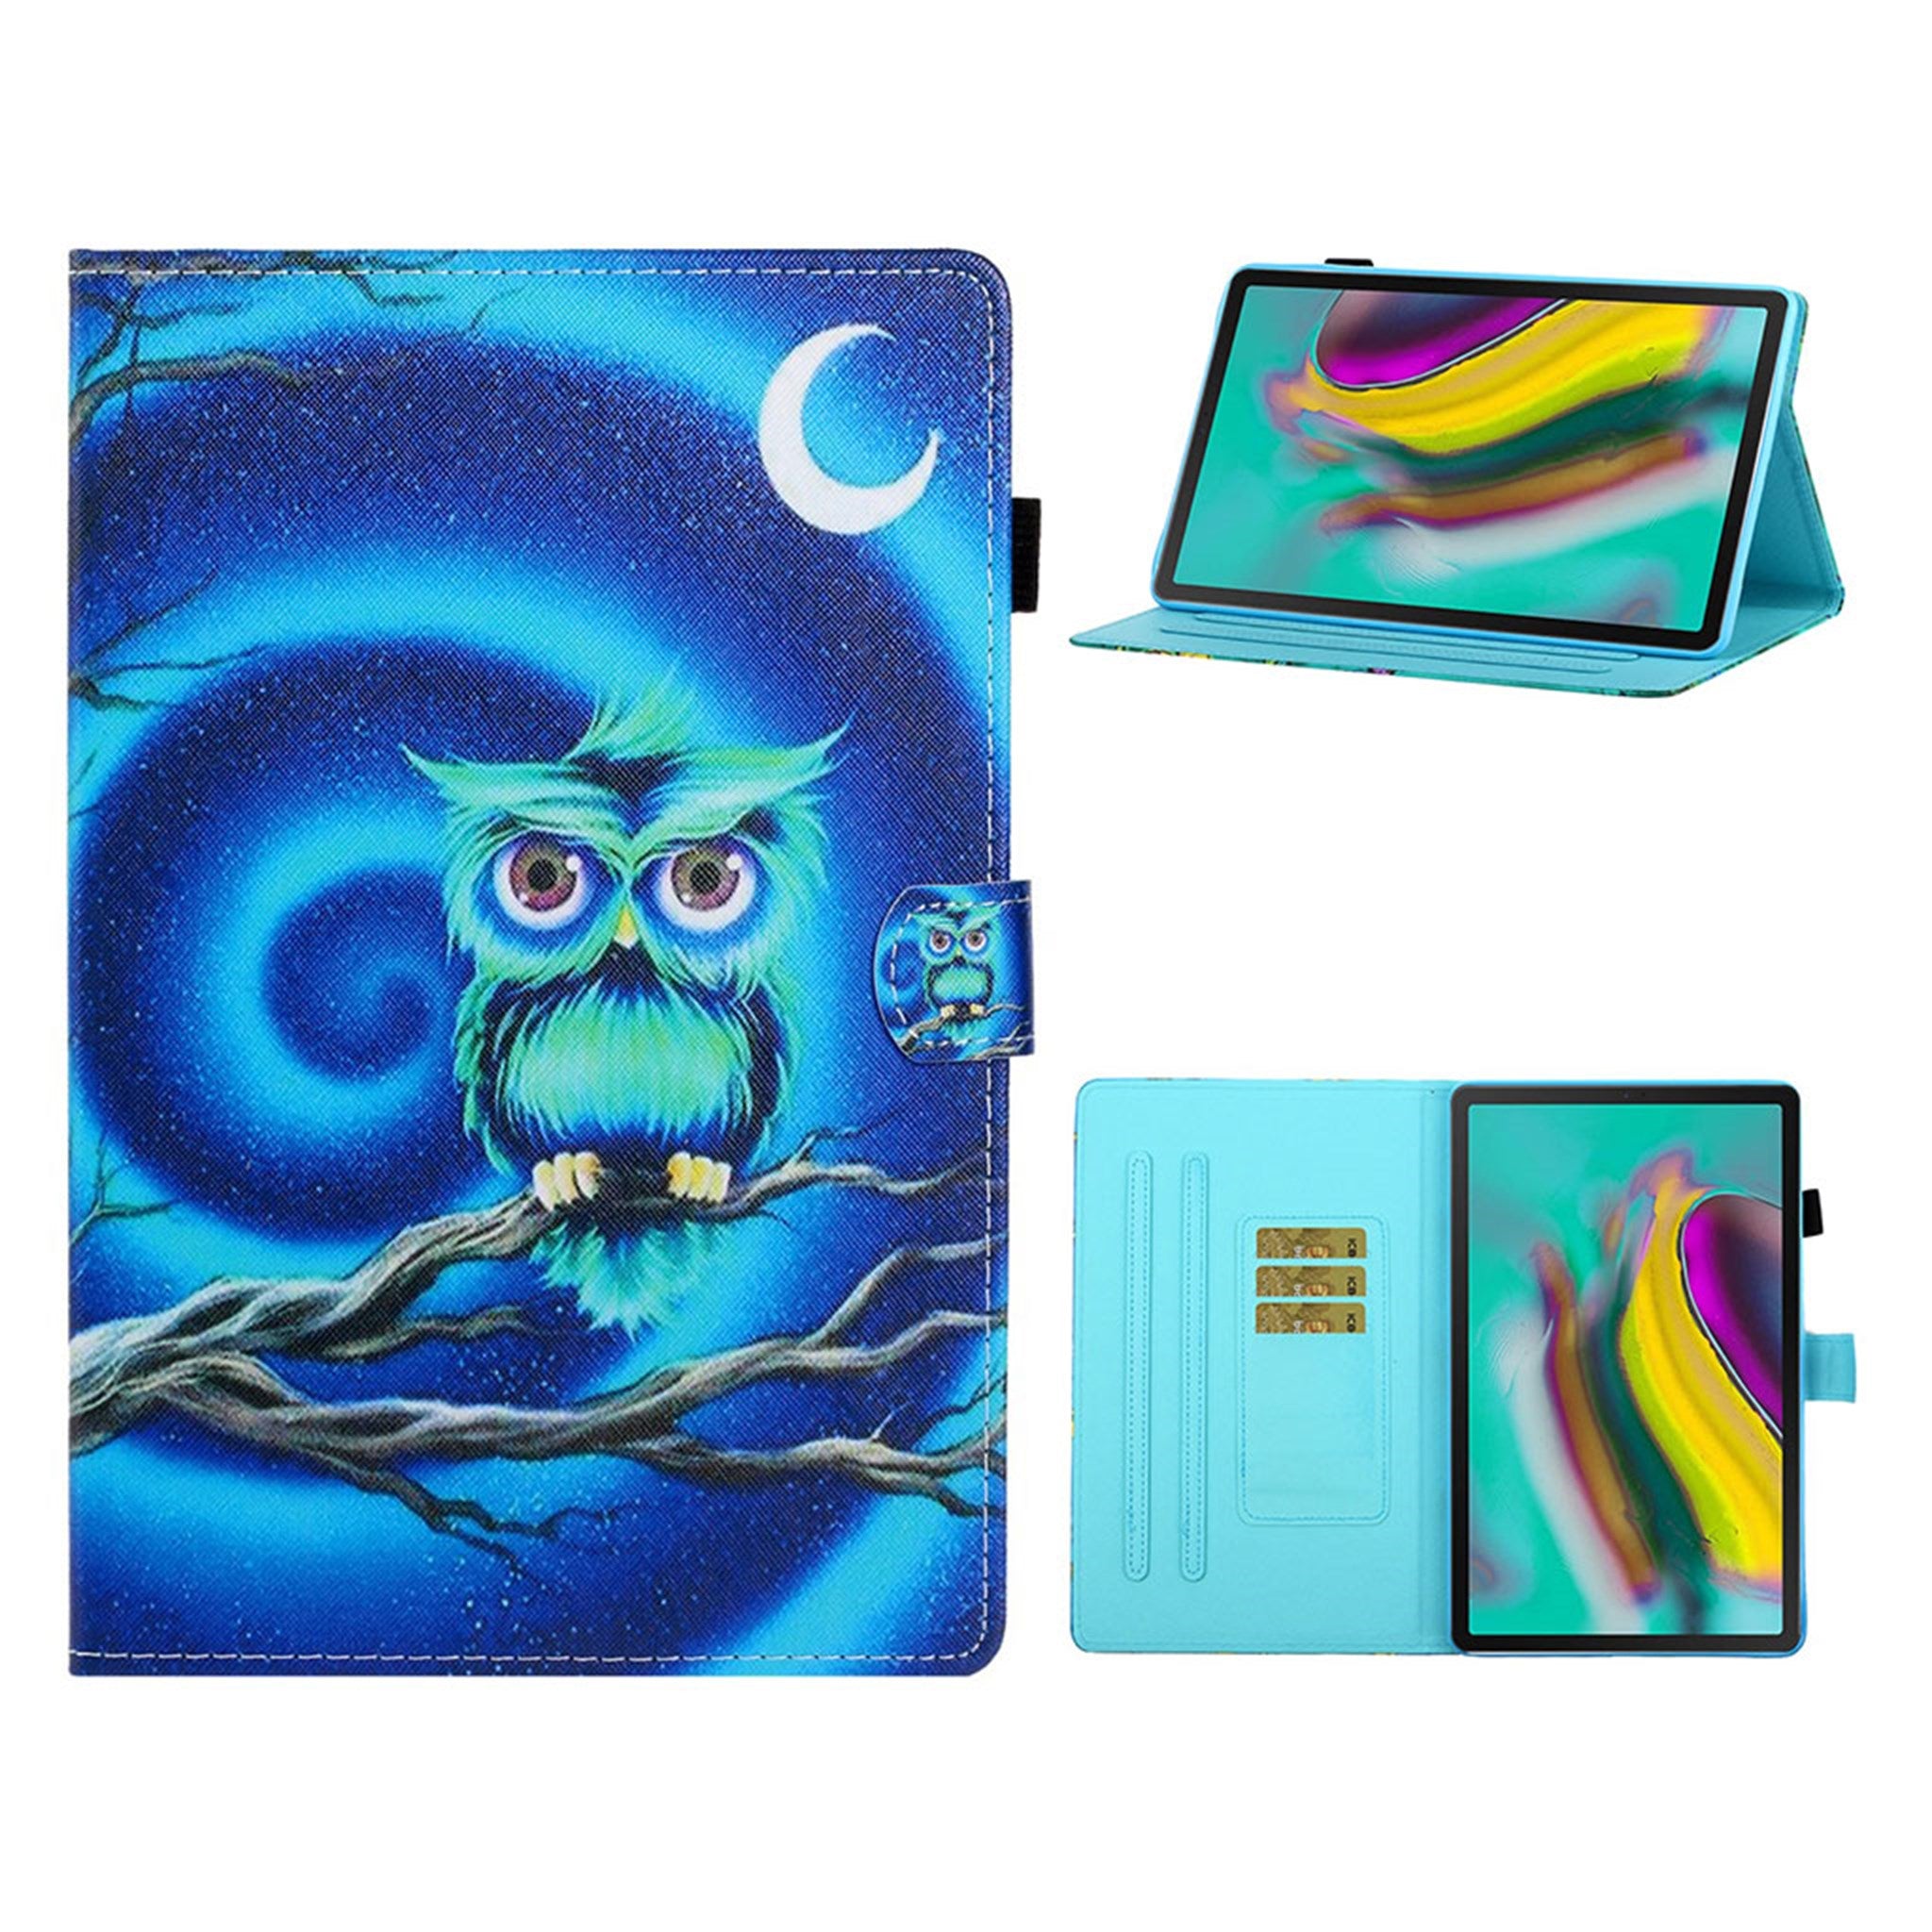 Samsung Galaxy Tab S5e cool pattern leather flip case - Owl and Moon